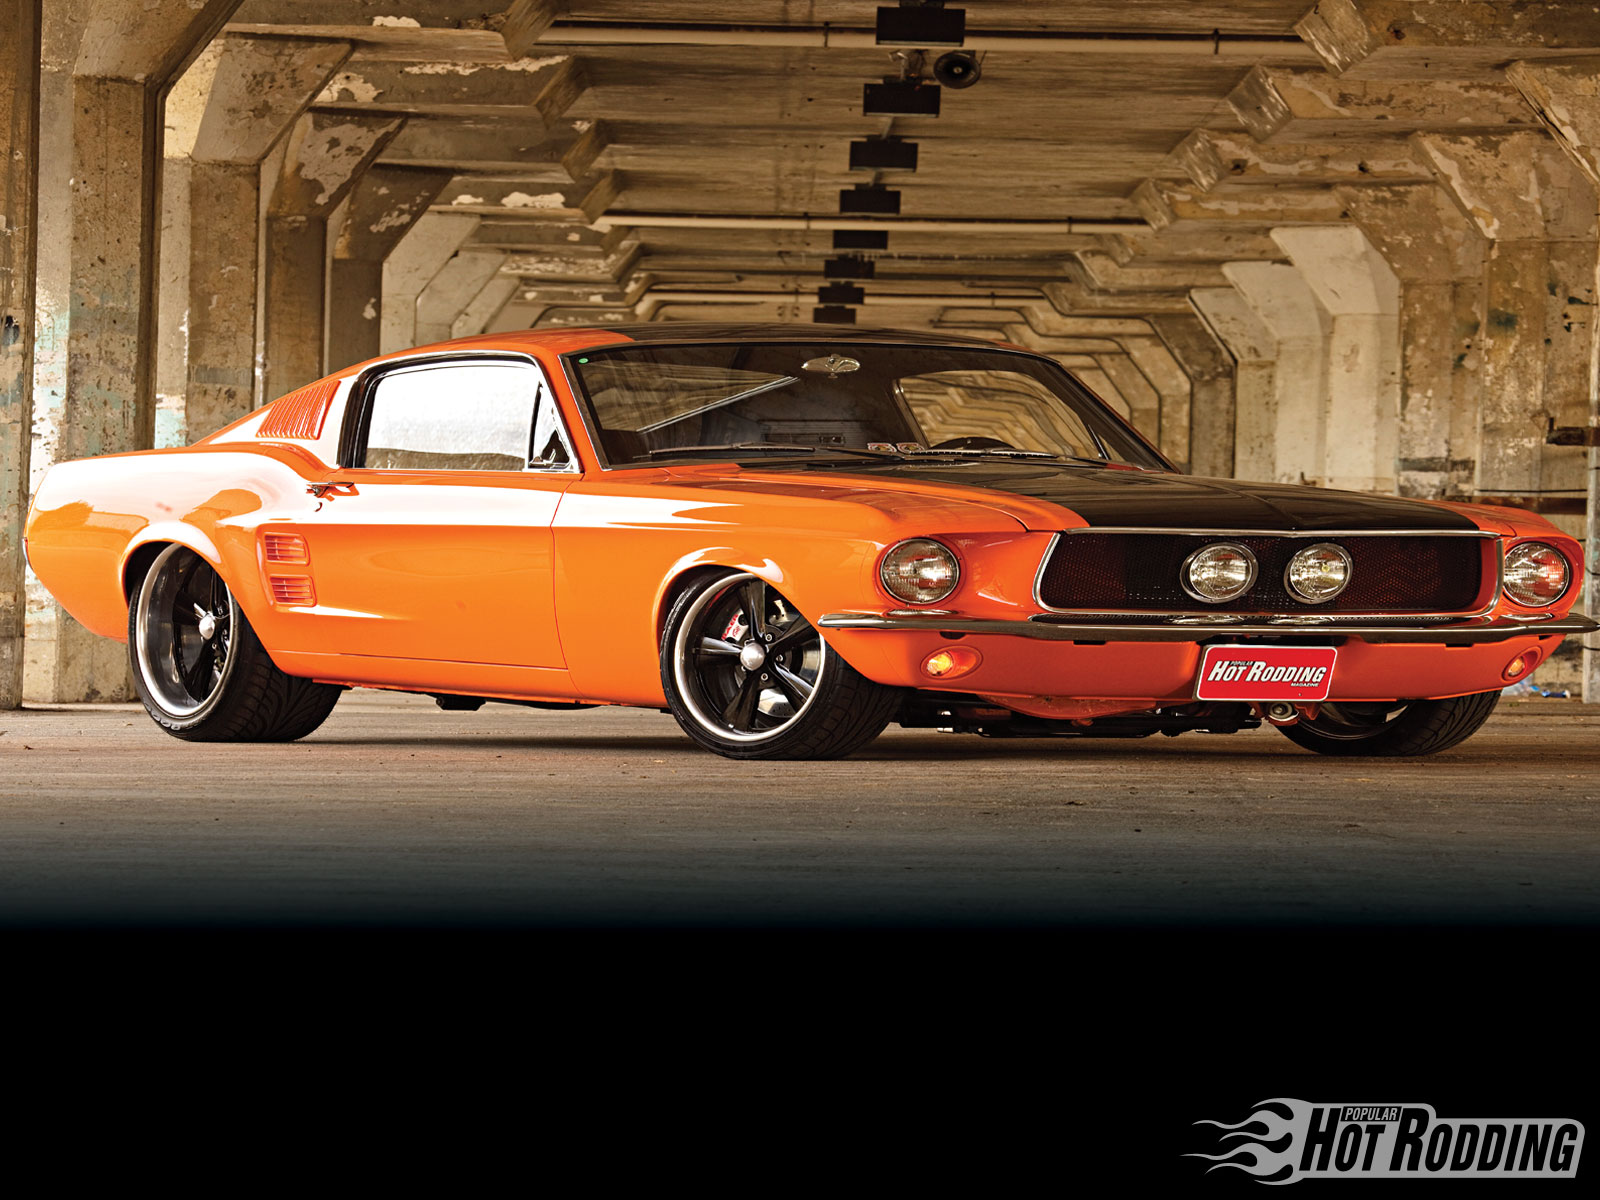 Windows Backgrounds vehicles, ford mustang fastback, classic car, fastback, ford mustang, ford, hot rod, muscle car